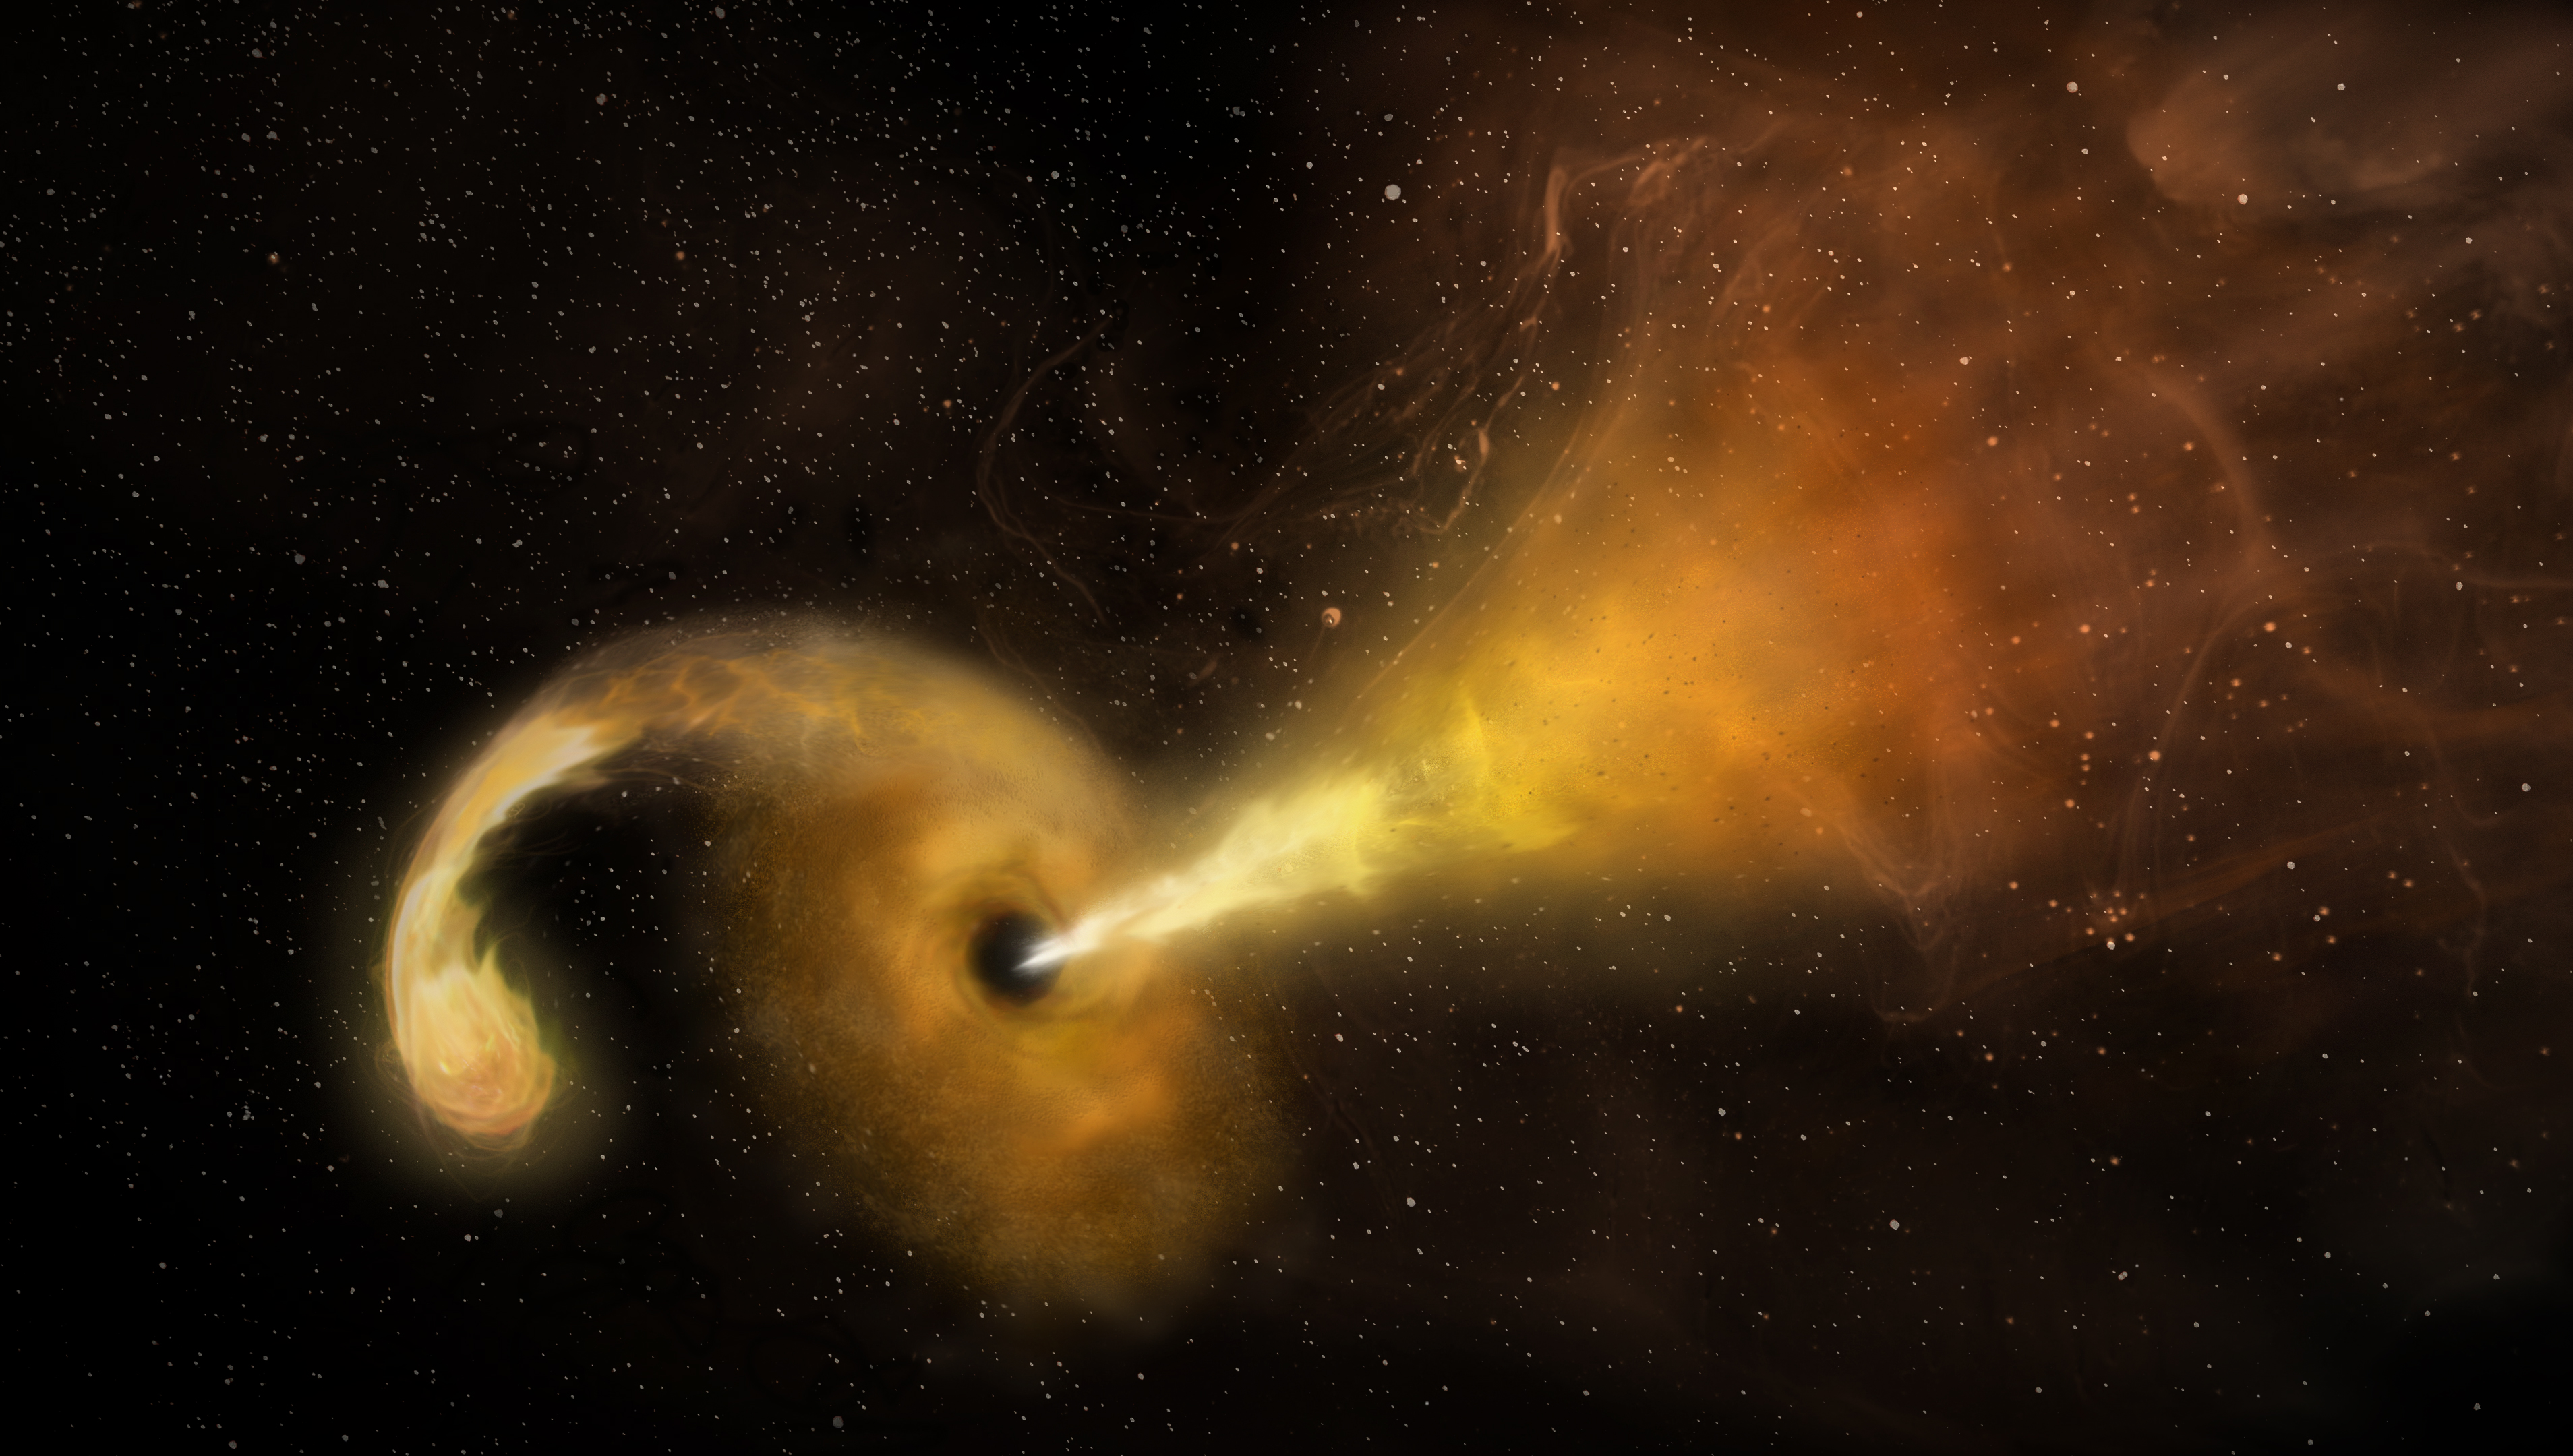  Artist conception of a tidal disruption event (TDE) that happens when a star
  passes fatally close to a supermassive black hole, which reacts by launching a
  relativistic jet. (Sophia Dagnello, NRAO/AUI/NSF.)